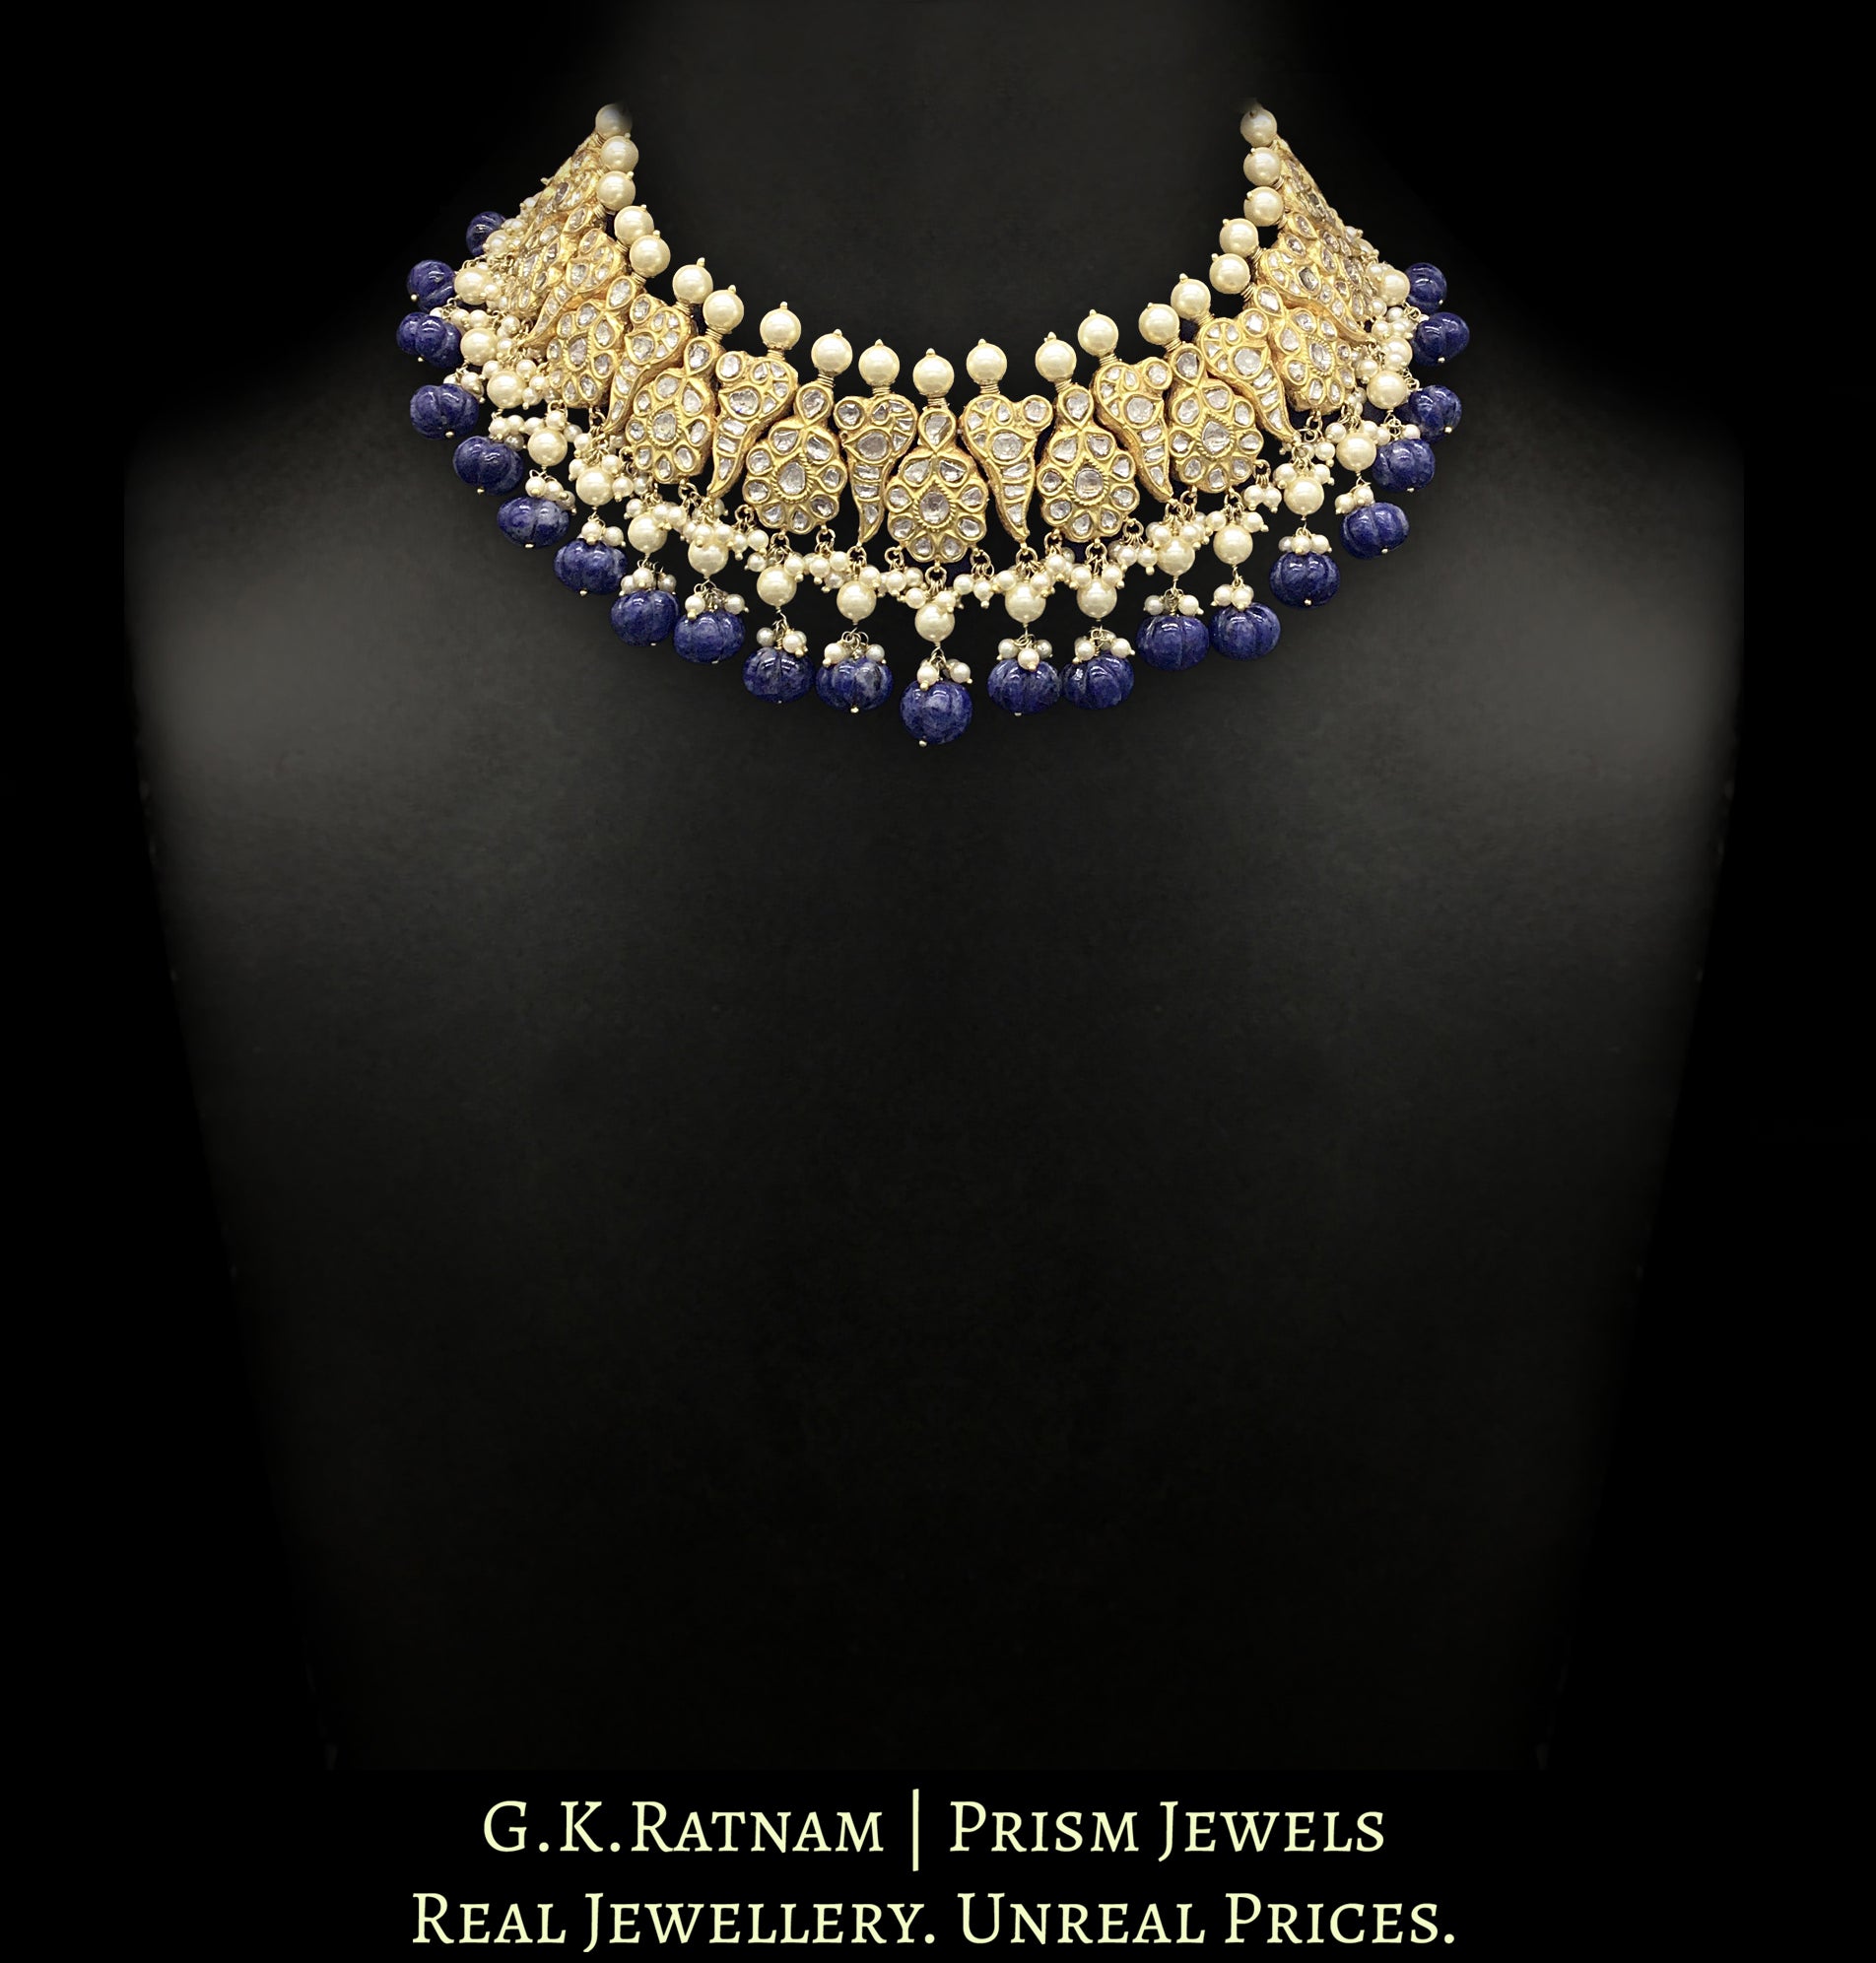 23k Gold and Diamond Polki Peacock (mor) Necklace with Carved Sodalite Melons